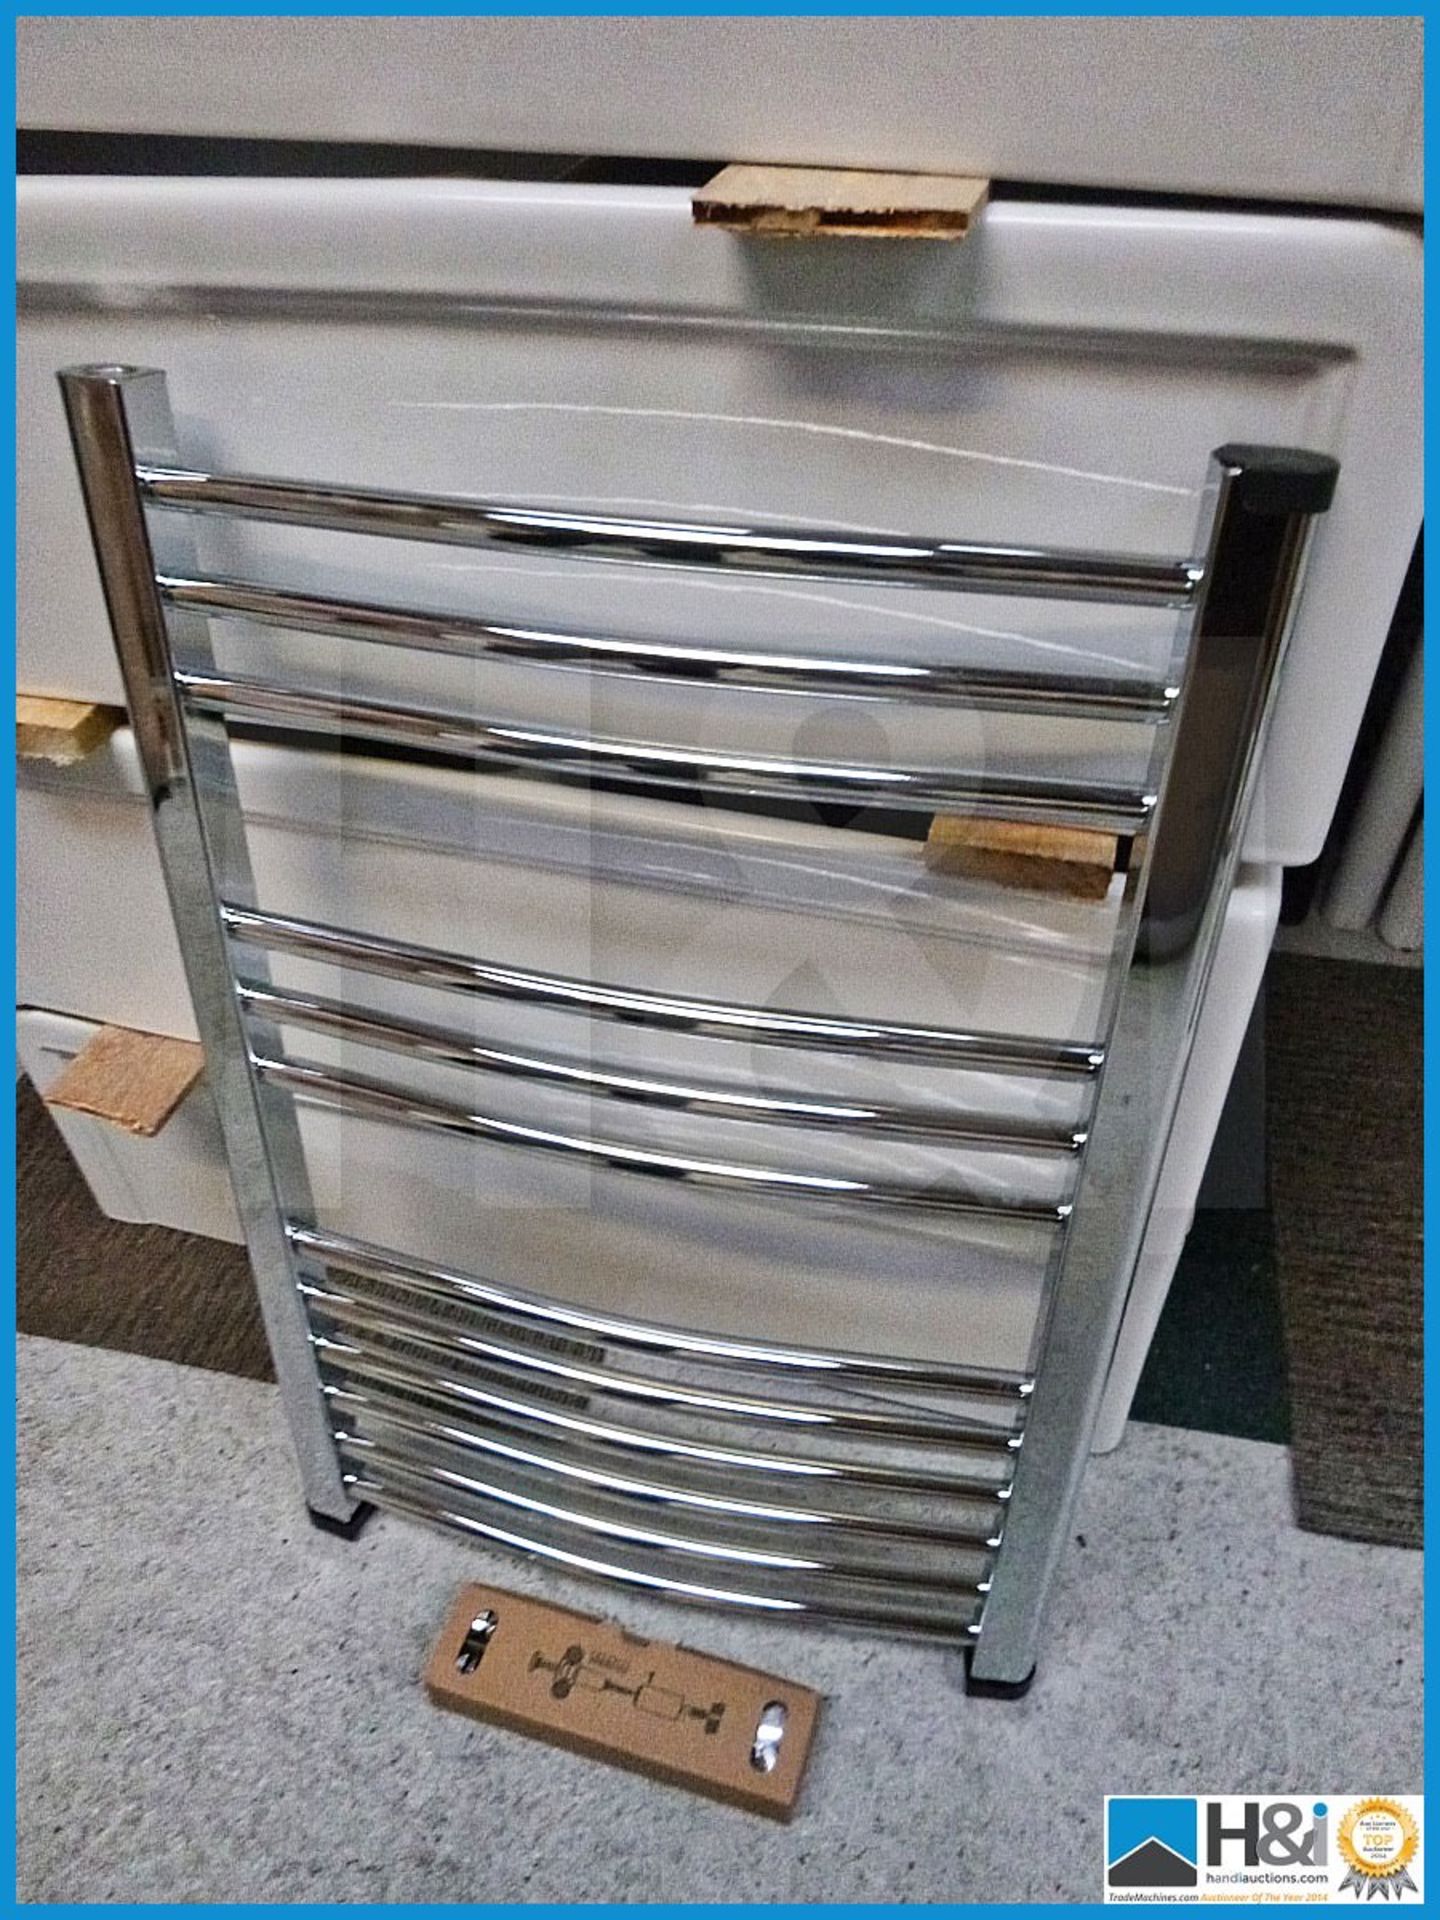 Chrome towel radiator 750X500mm. Complete with fittings RRP 129 GBP - Image 2 of 4